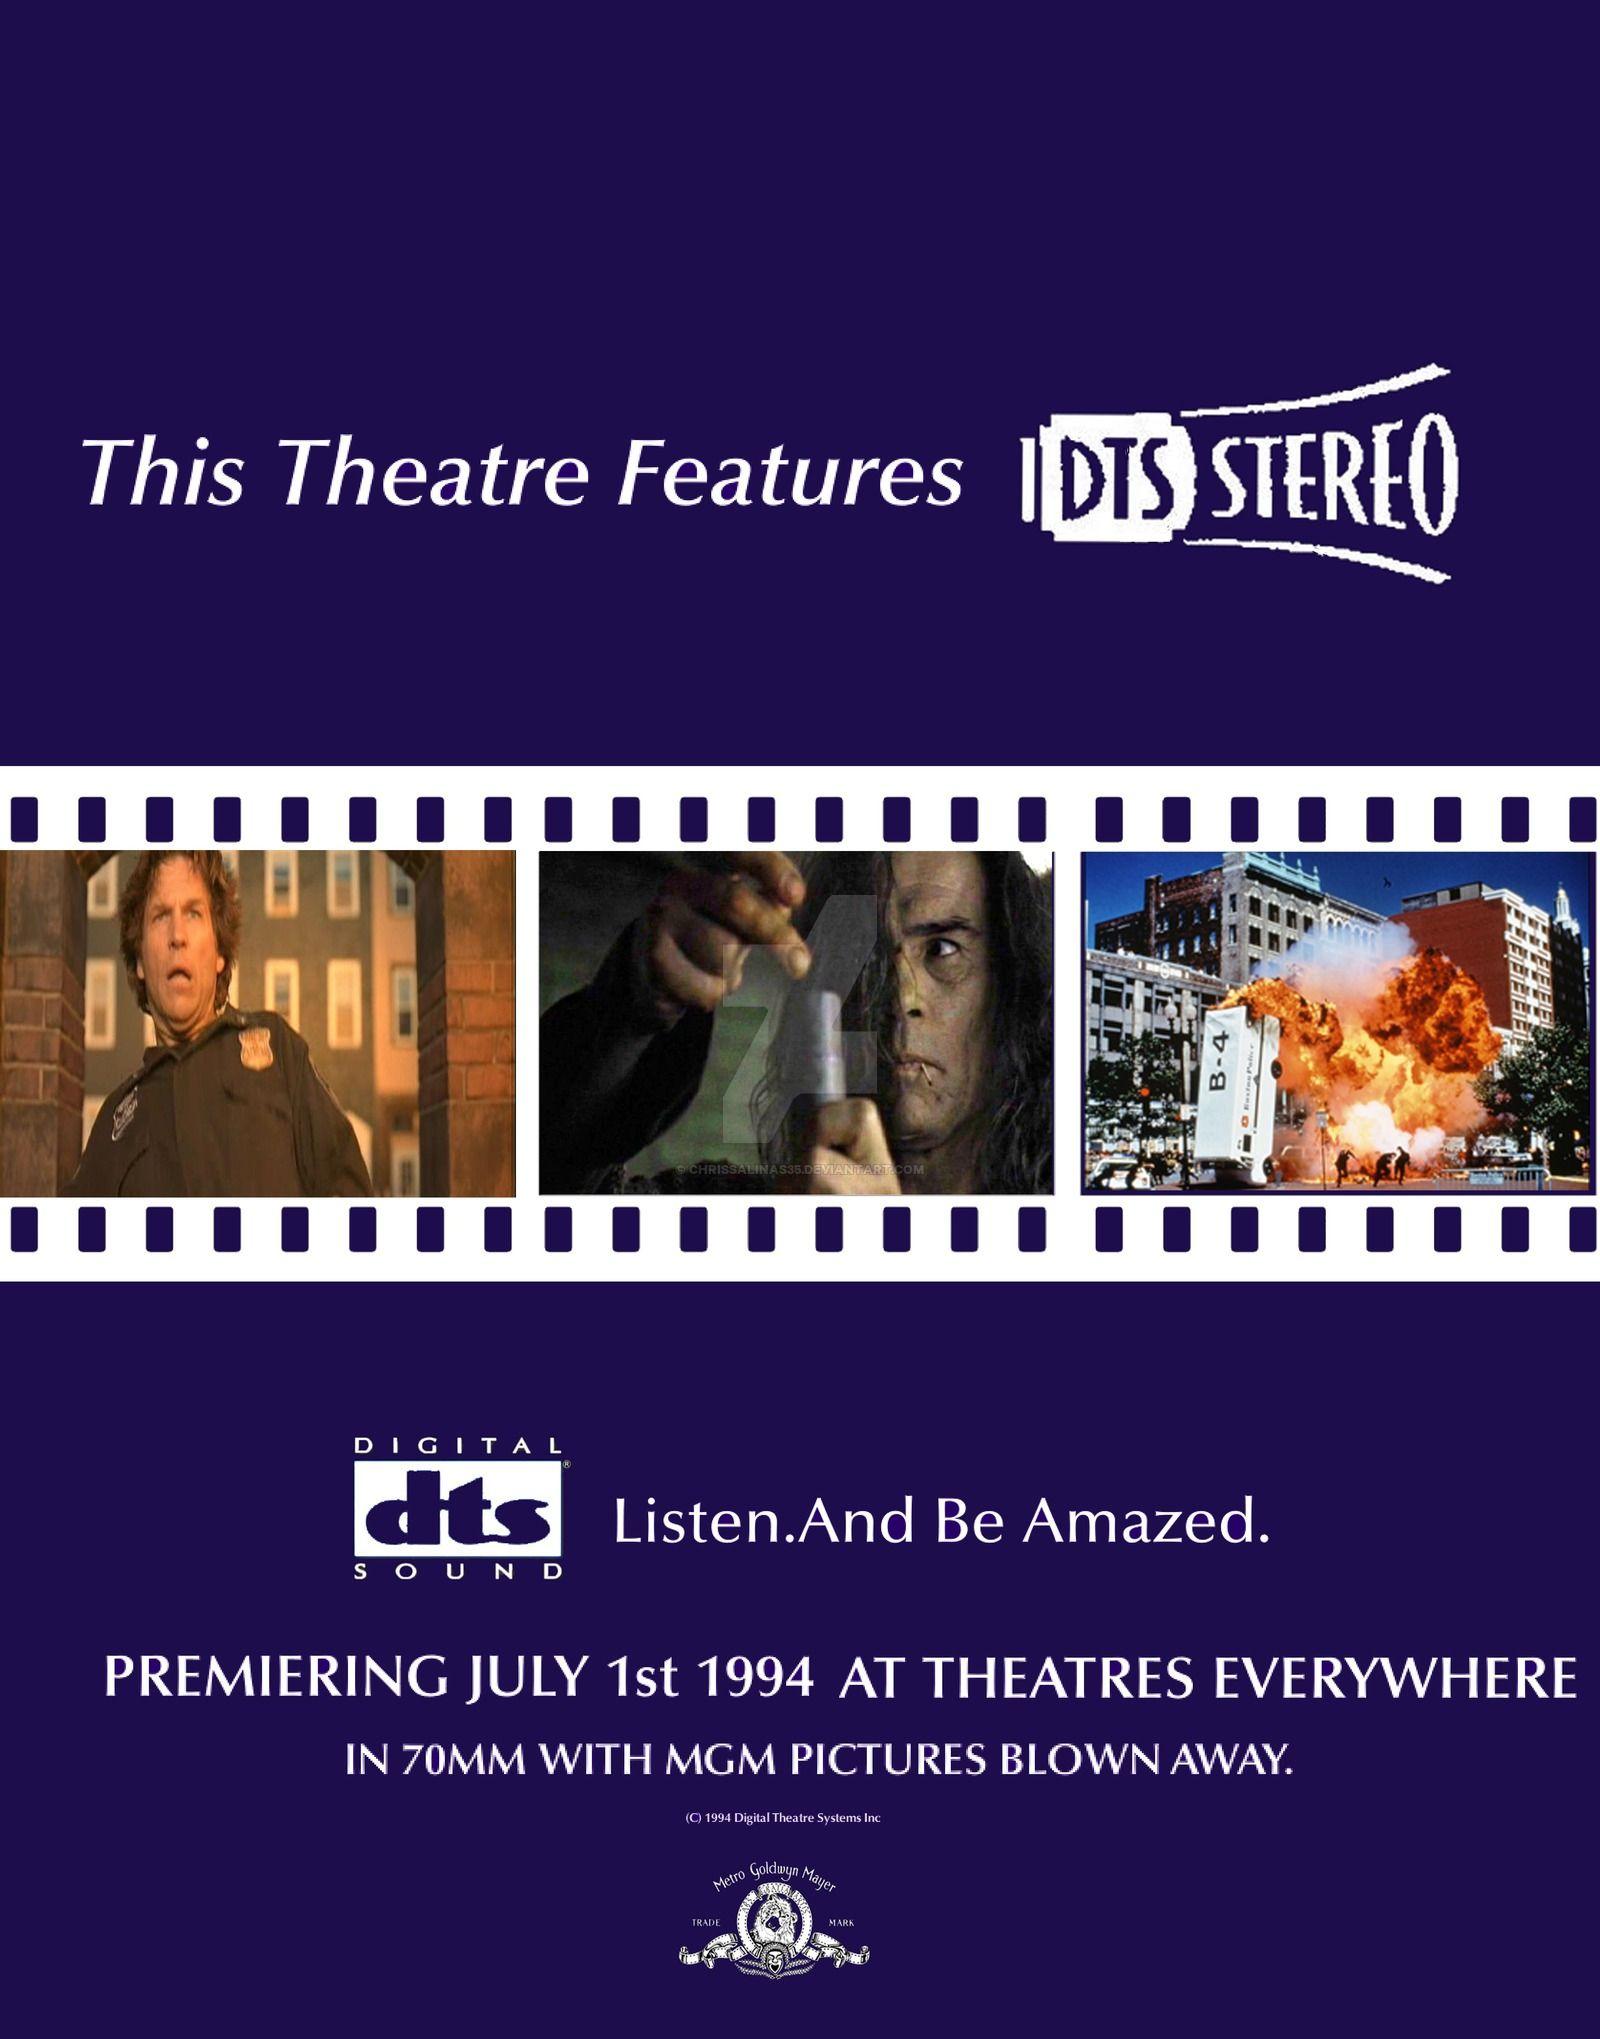 DTS Stereo Logo - DTS Stereo 1994 Theatrical Poster by ChrisSalinas35 on DeviantArt